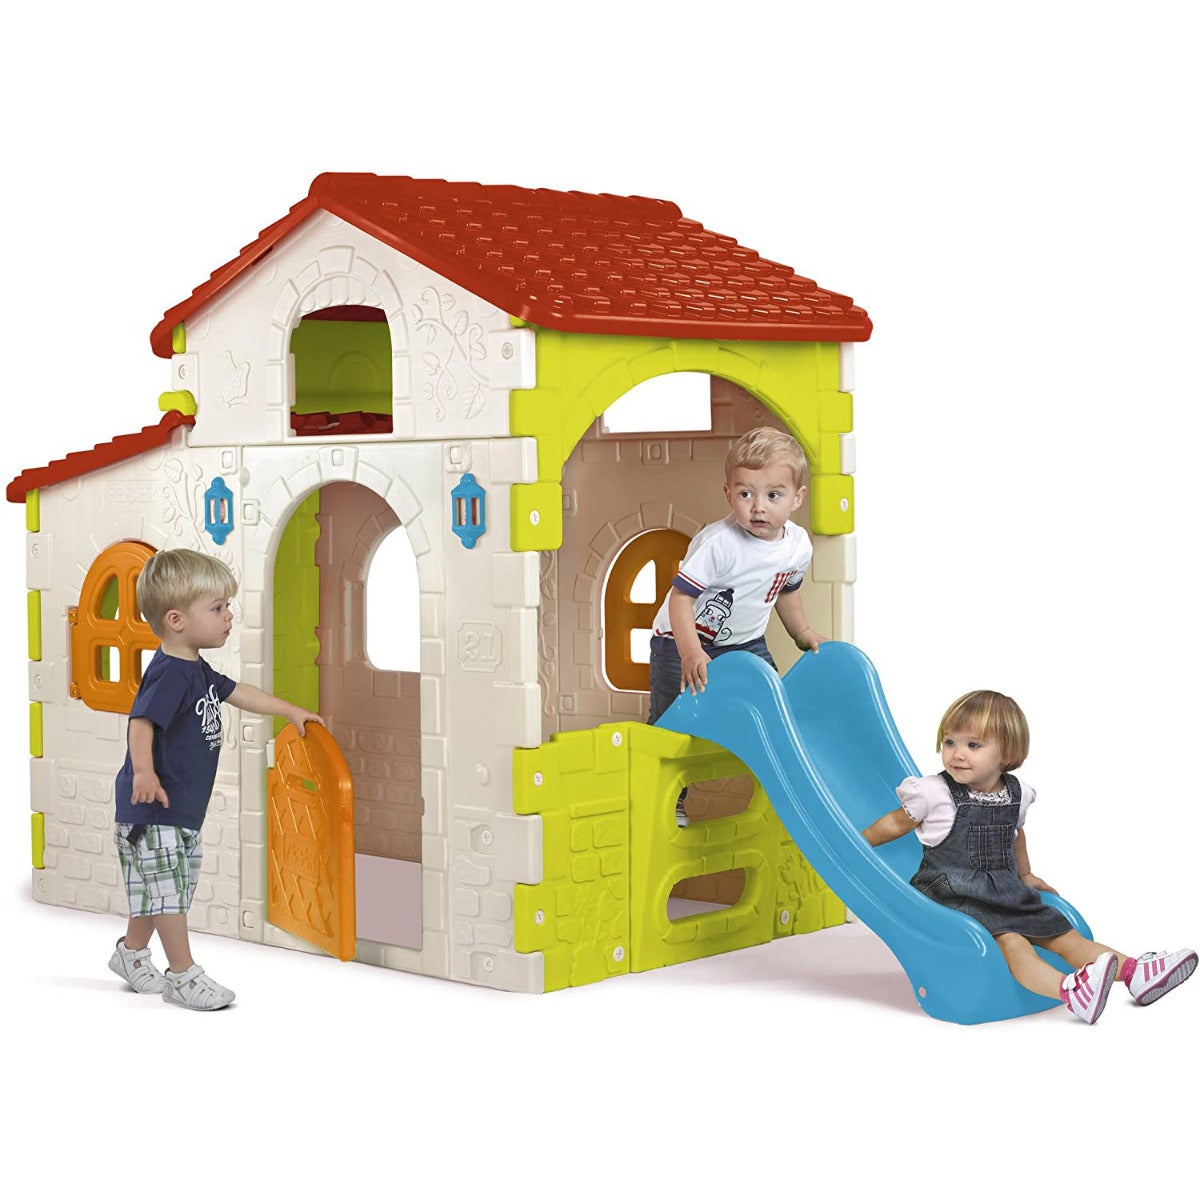 Feber Beauty Play House with Slide.